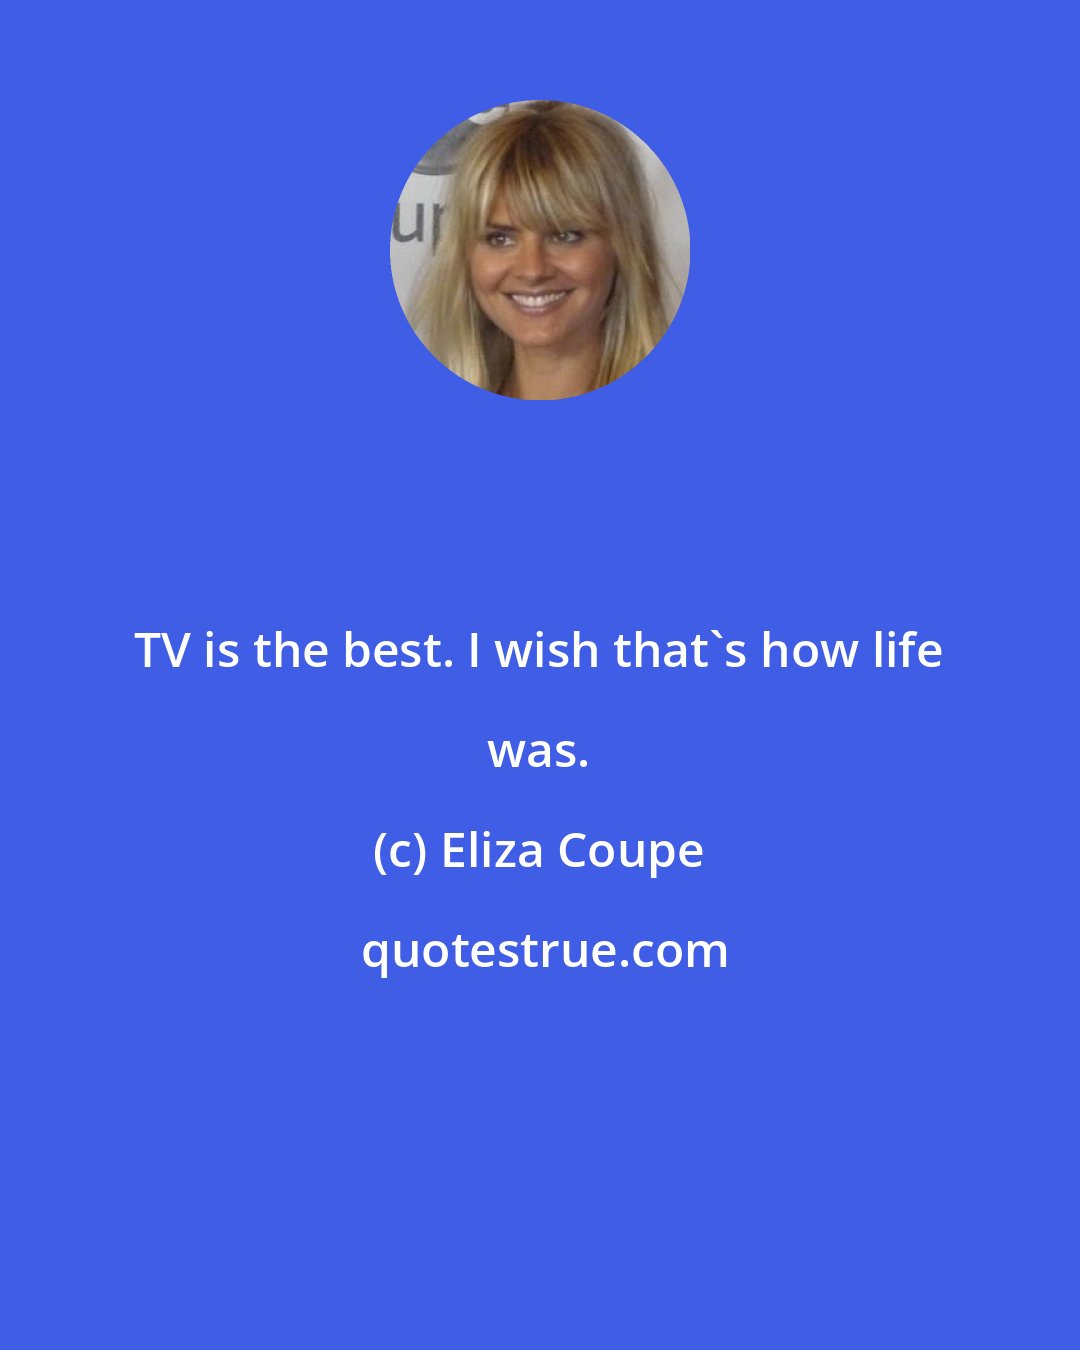 Eliza Coupe: TV is the best. I wish that's how life was.